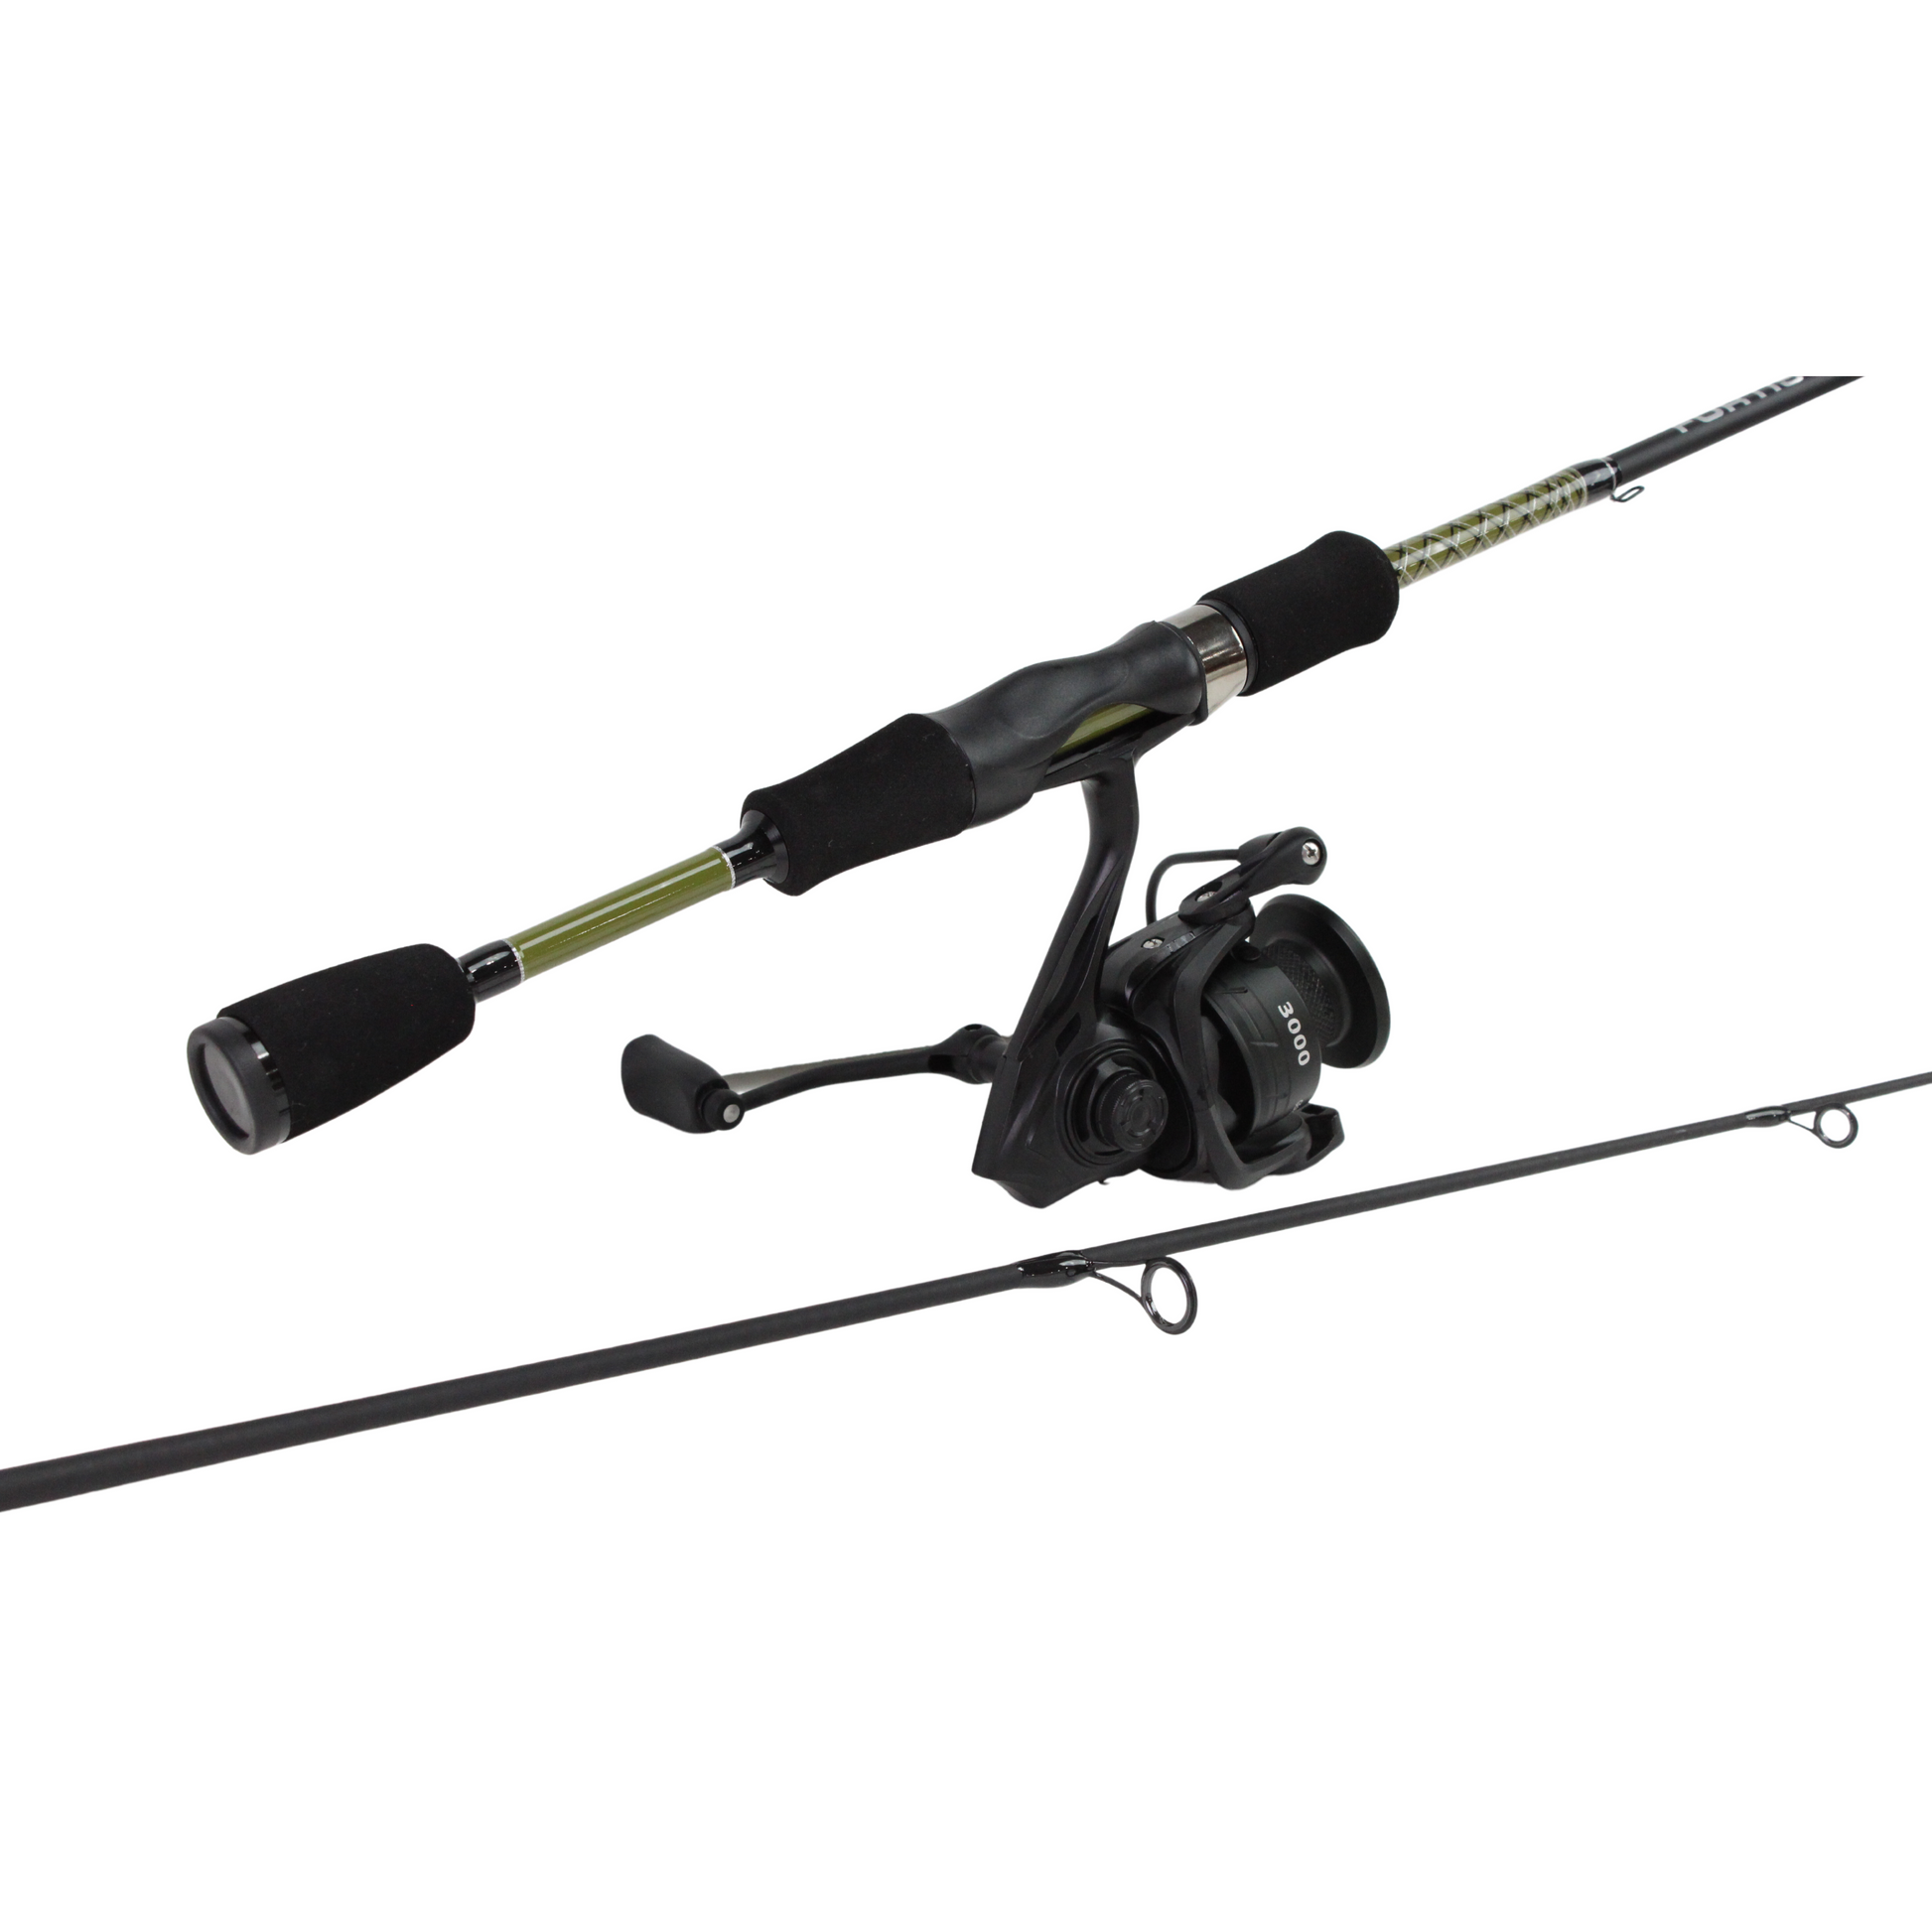 FORTIS 5' 6 Light Action 2 Piece Spinning Rod and 3000 Spinning Reel –  Goodwynn's